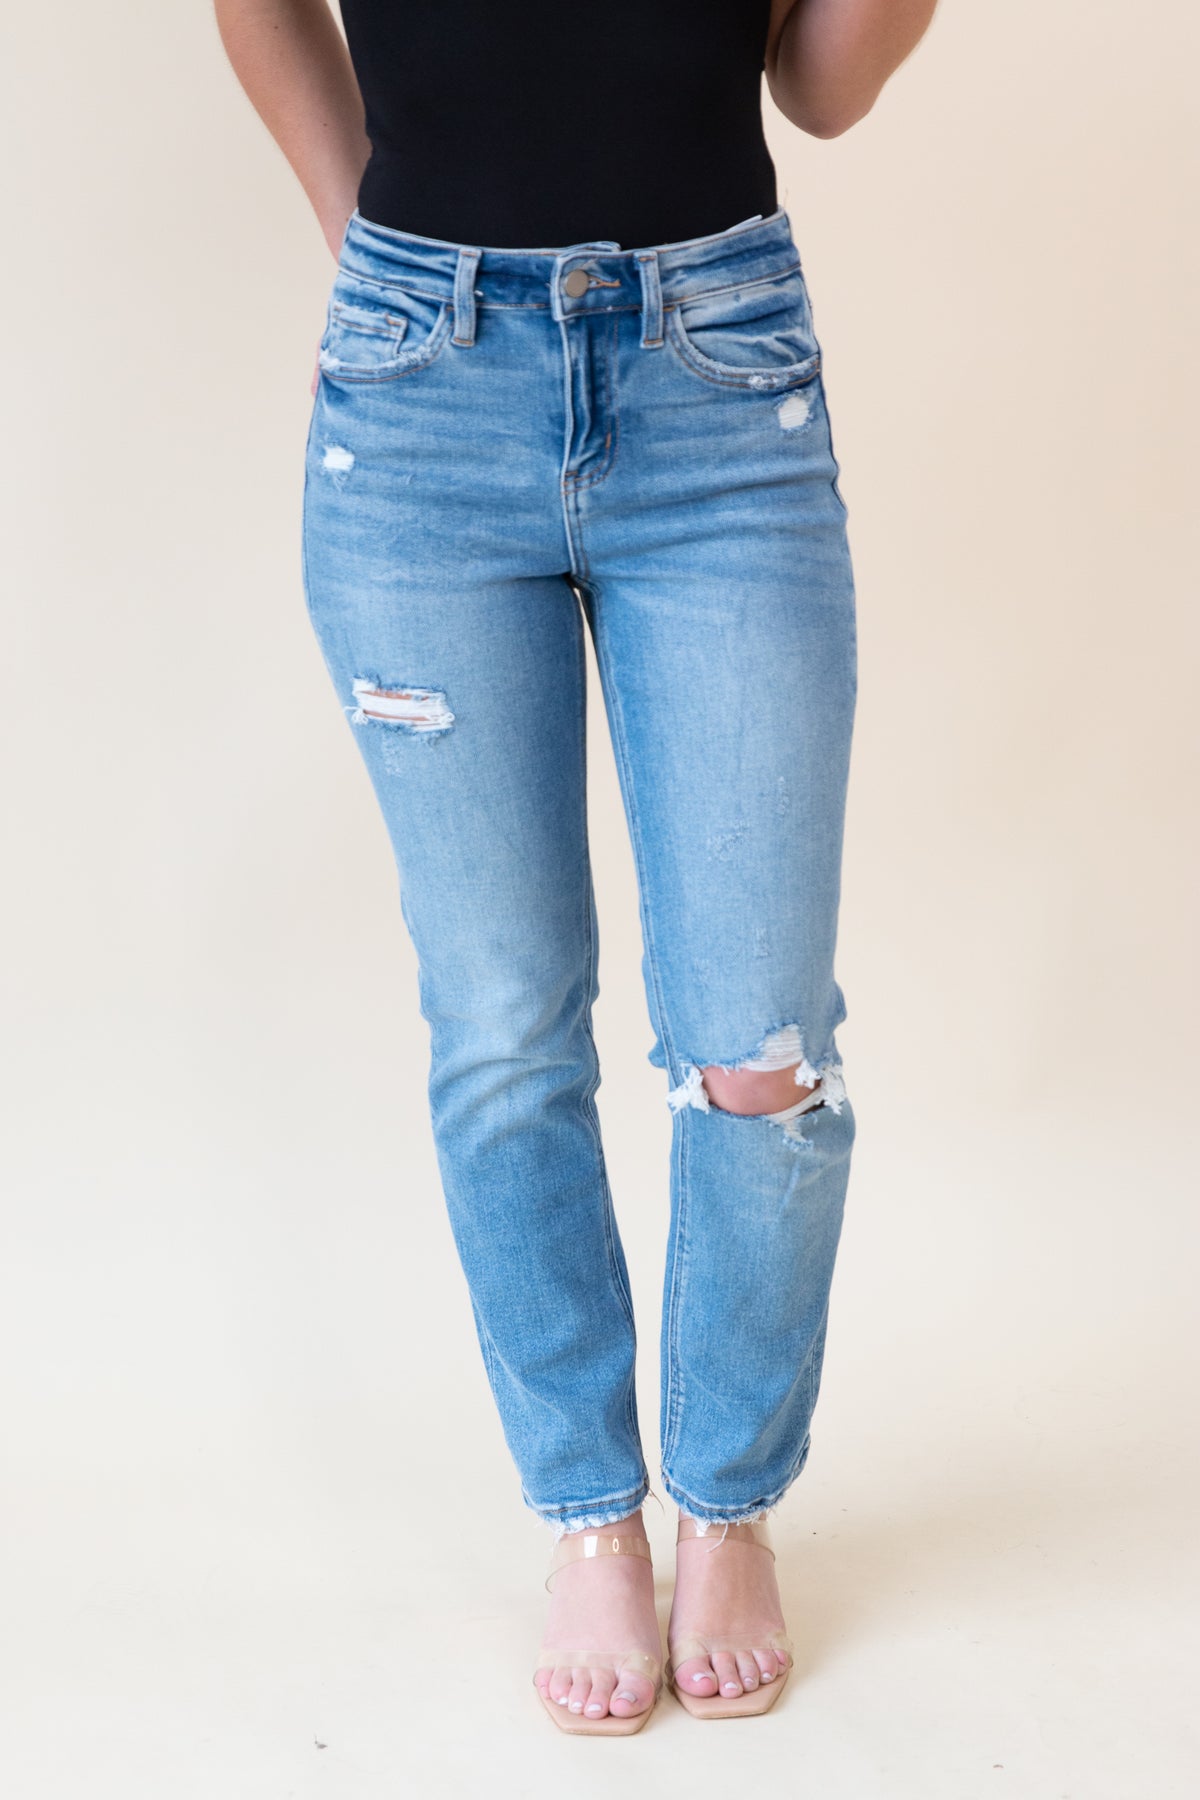 High Rise Crop Distressed Slim Straight Jeans